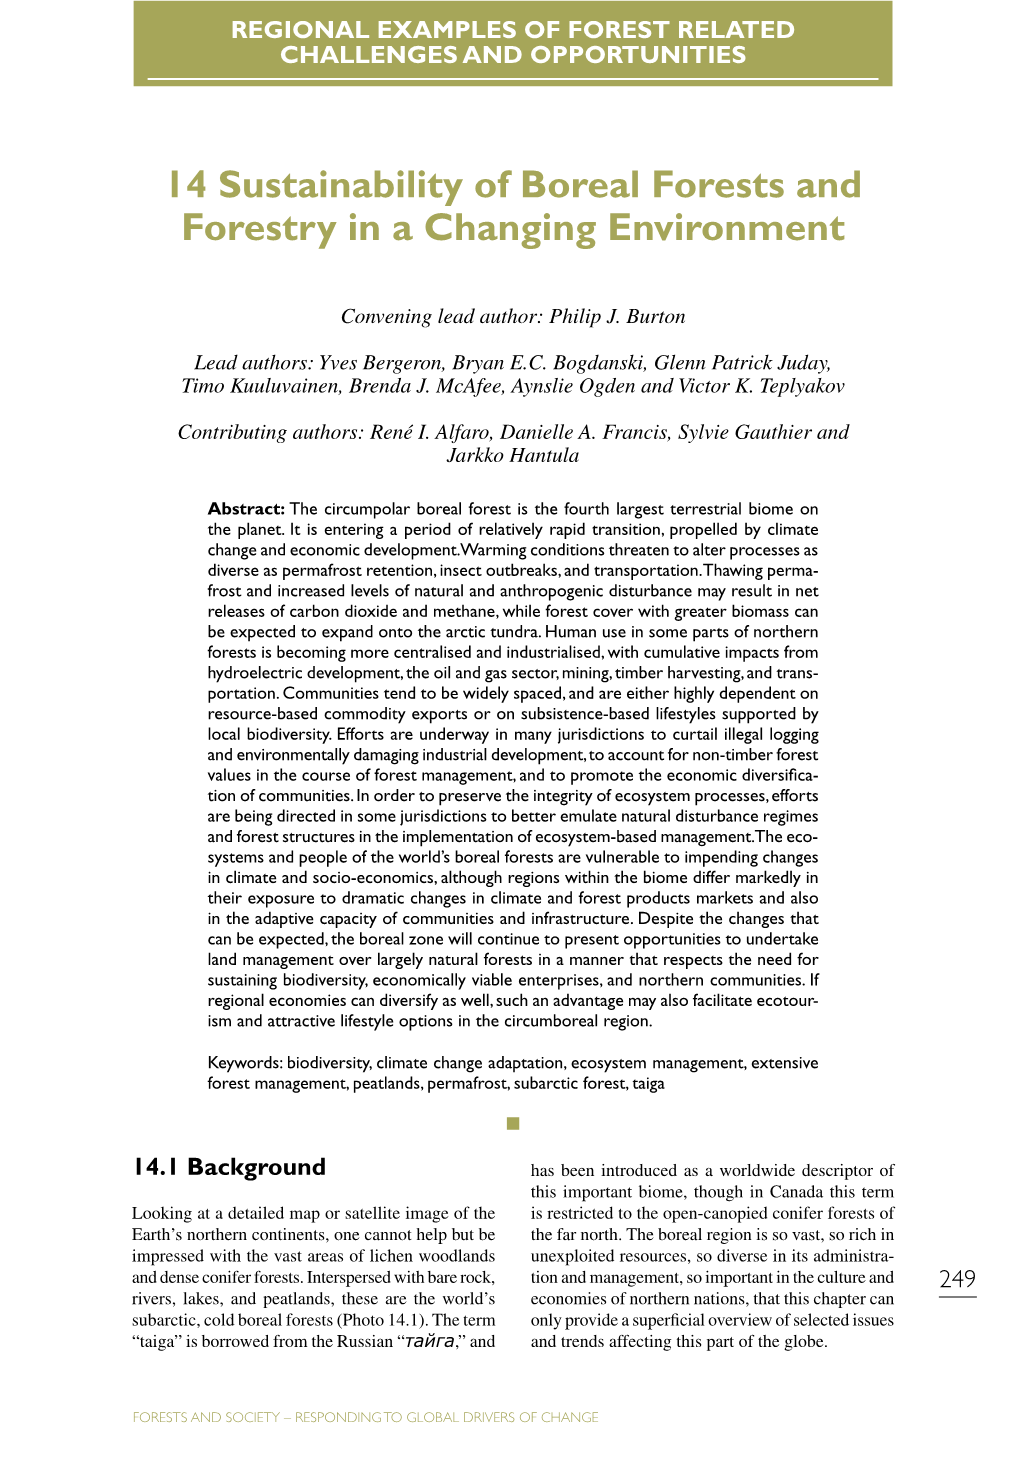 14 Sustainability of Boreal Forests and Forestry in a Changing Environment